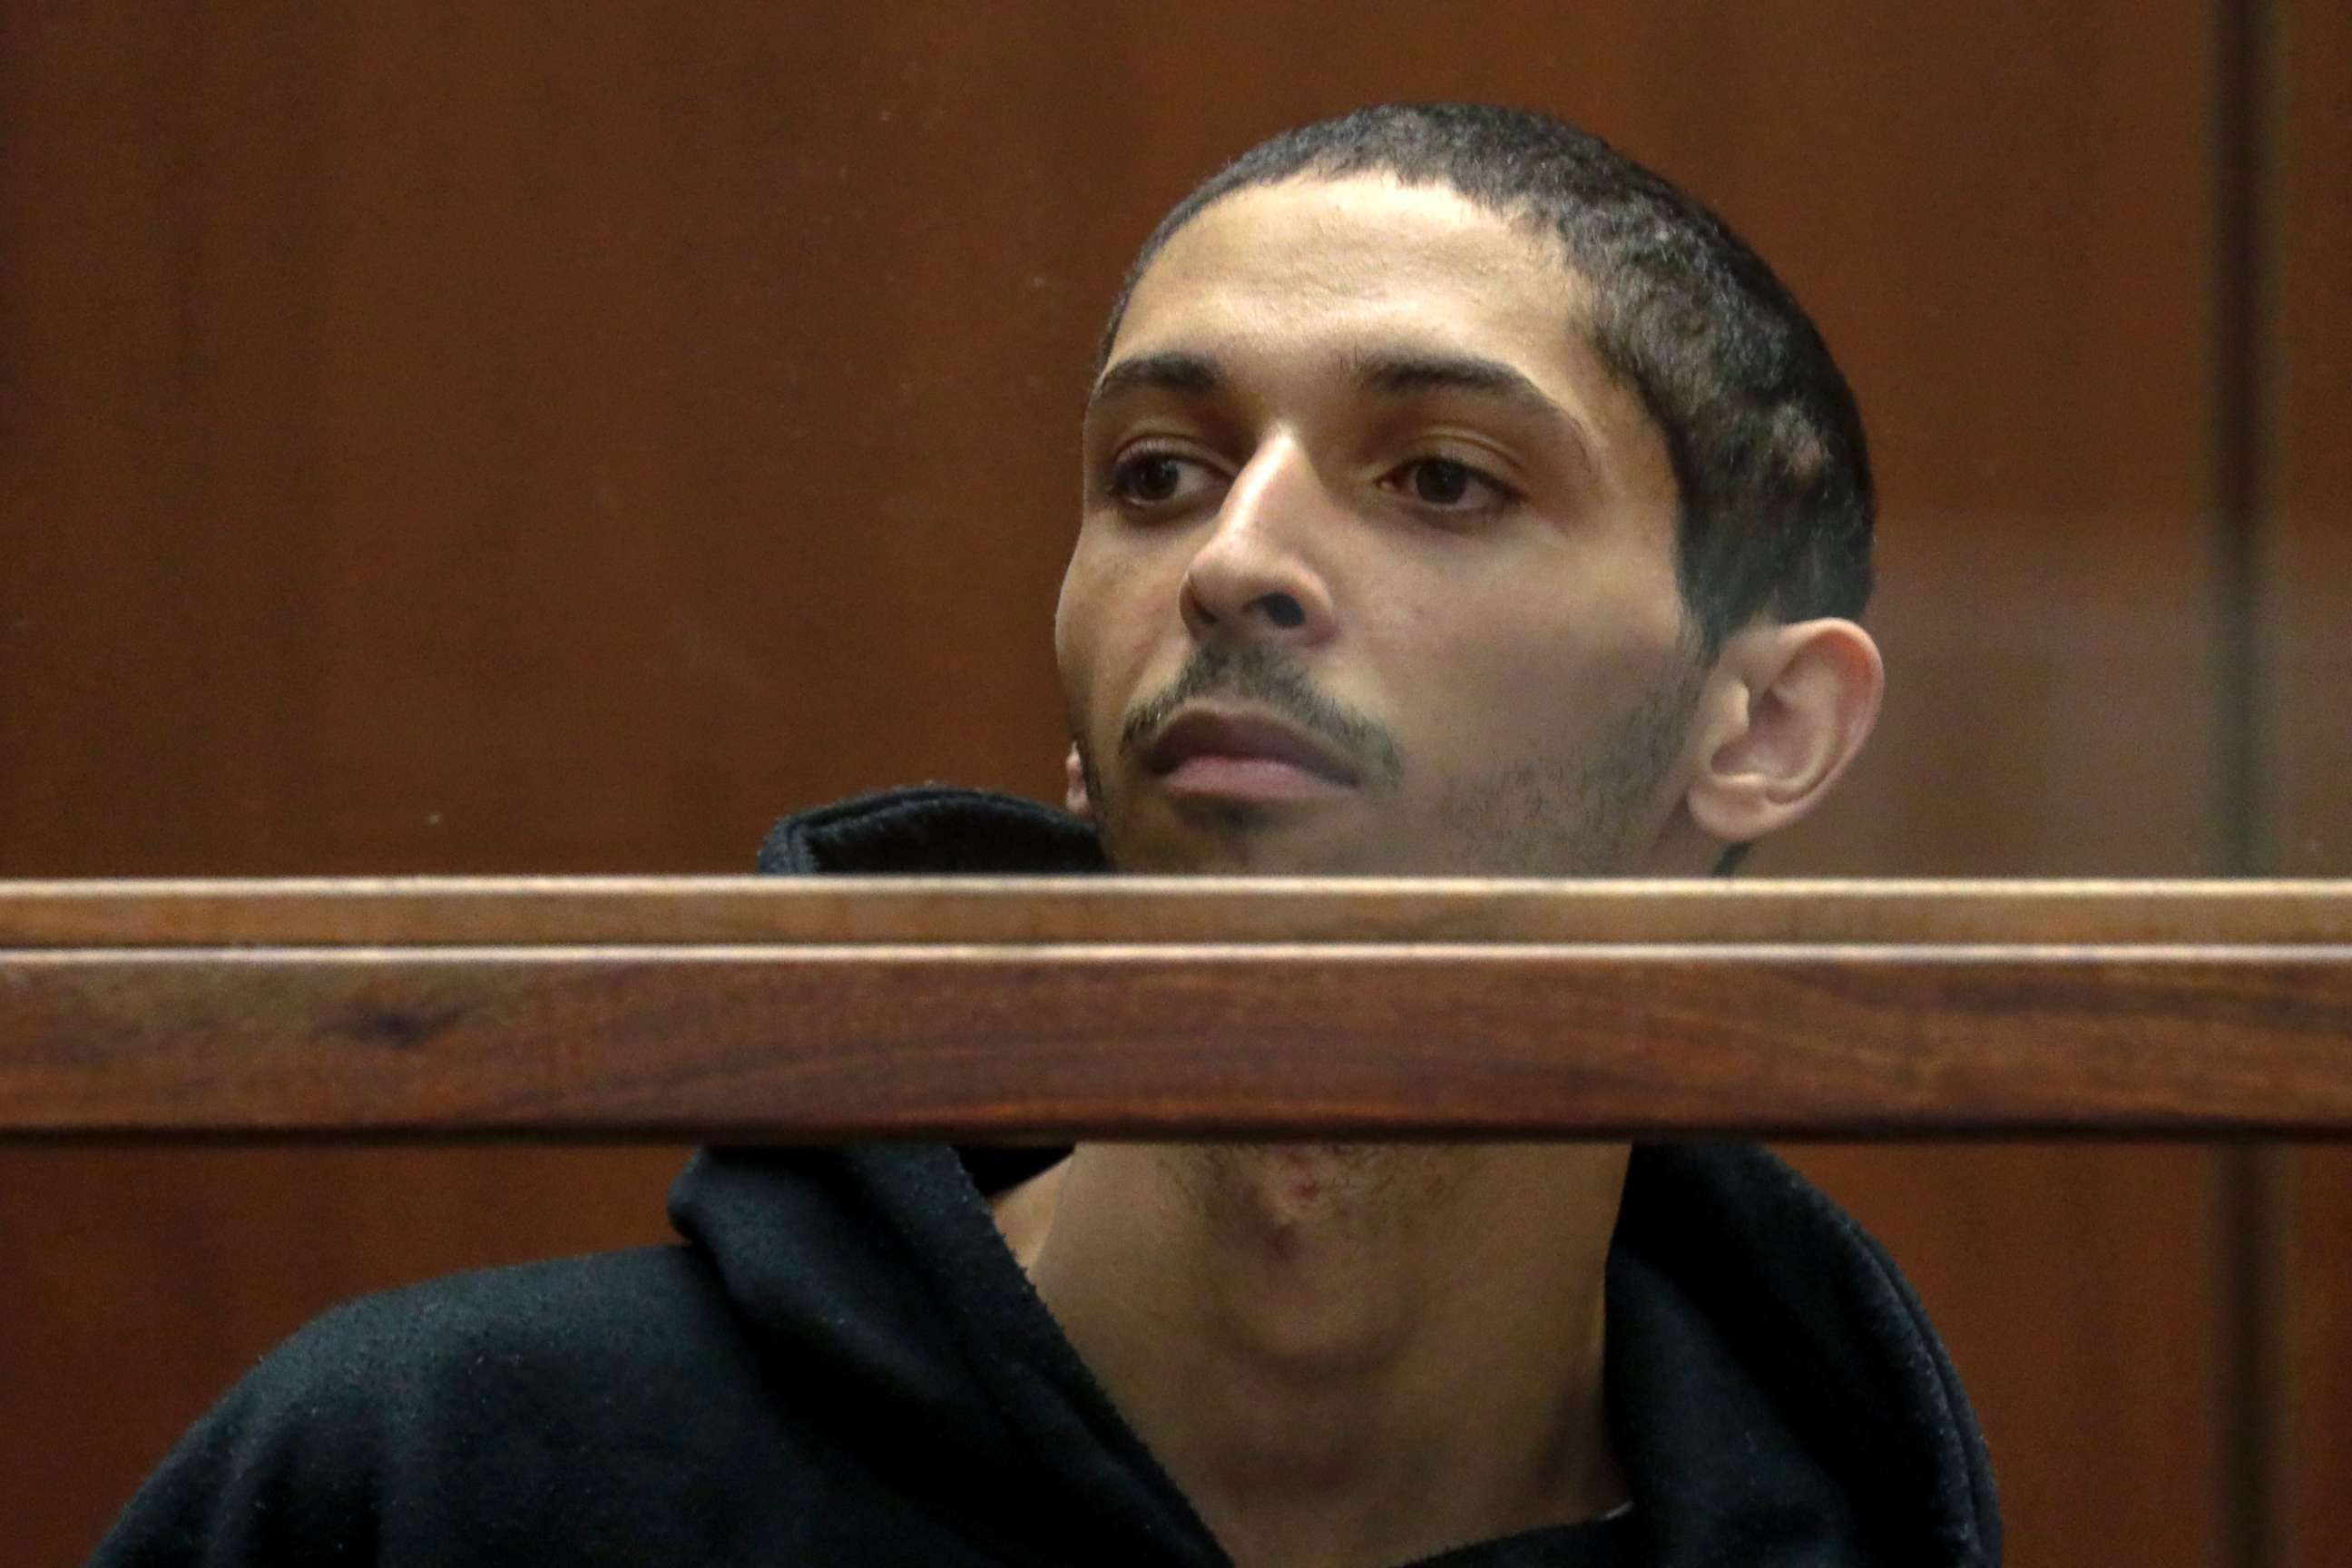 PHOTO: Tyler Barriss appears for an extradition hearing at Los Angeles Superior Court on Wednesday, Jan. 3, 2018, in Los Angeles.